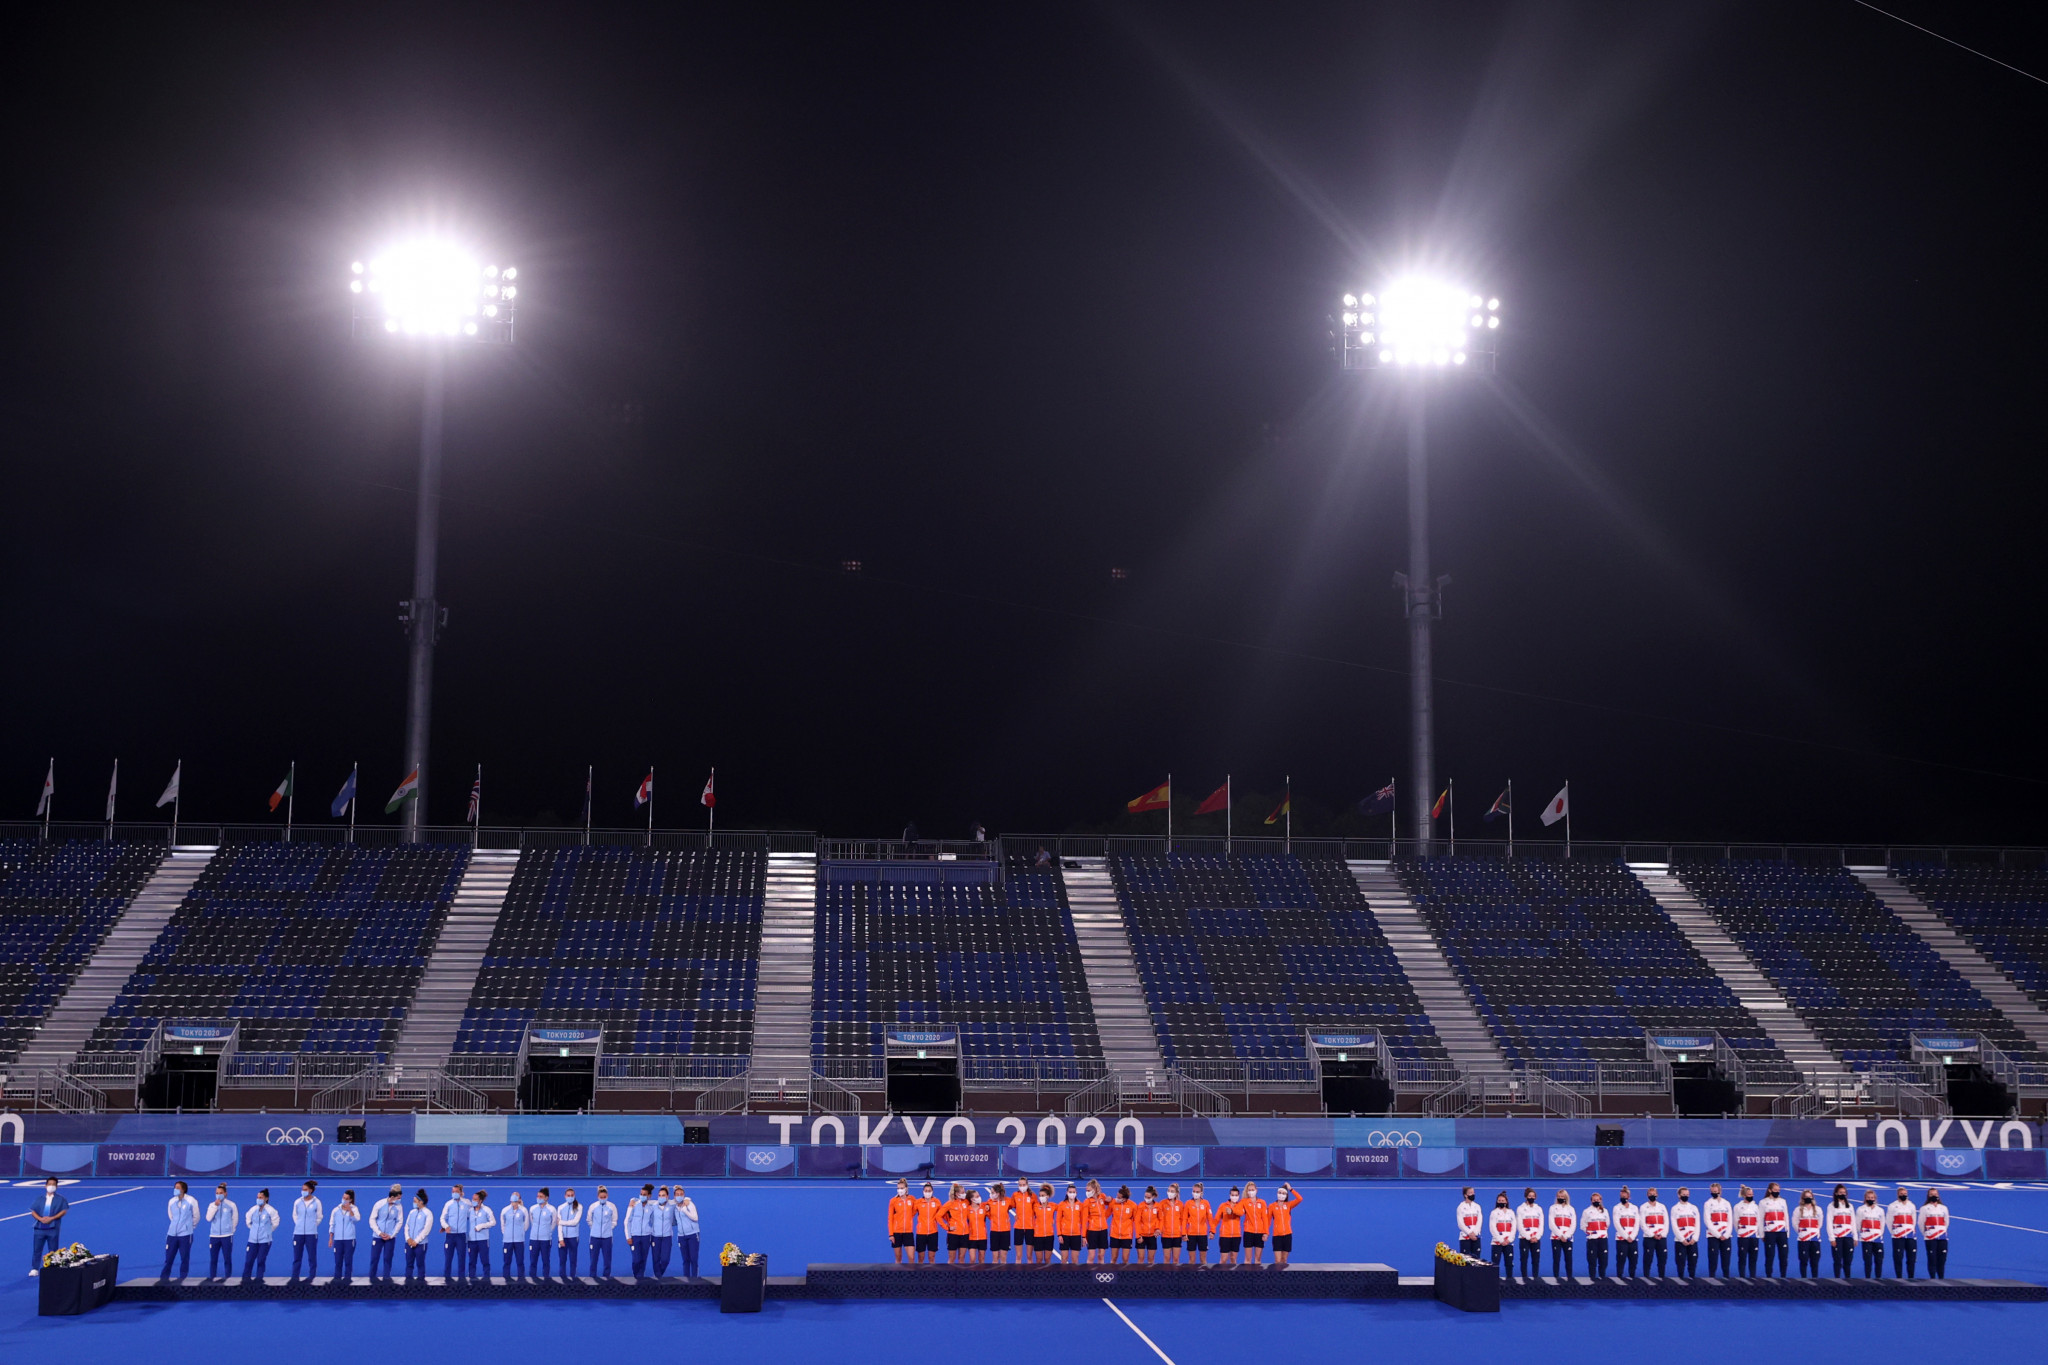 The FIH's Executive Board said the hockey competitions at Tokyo 2020 were a success despite the challenges of the coronavirus pandemic ©Getty Images 